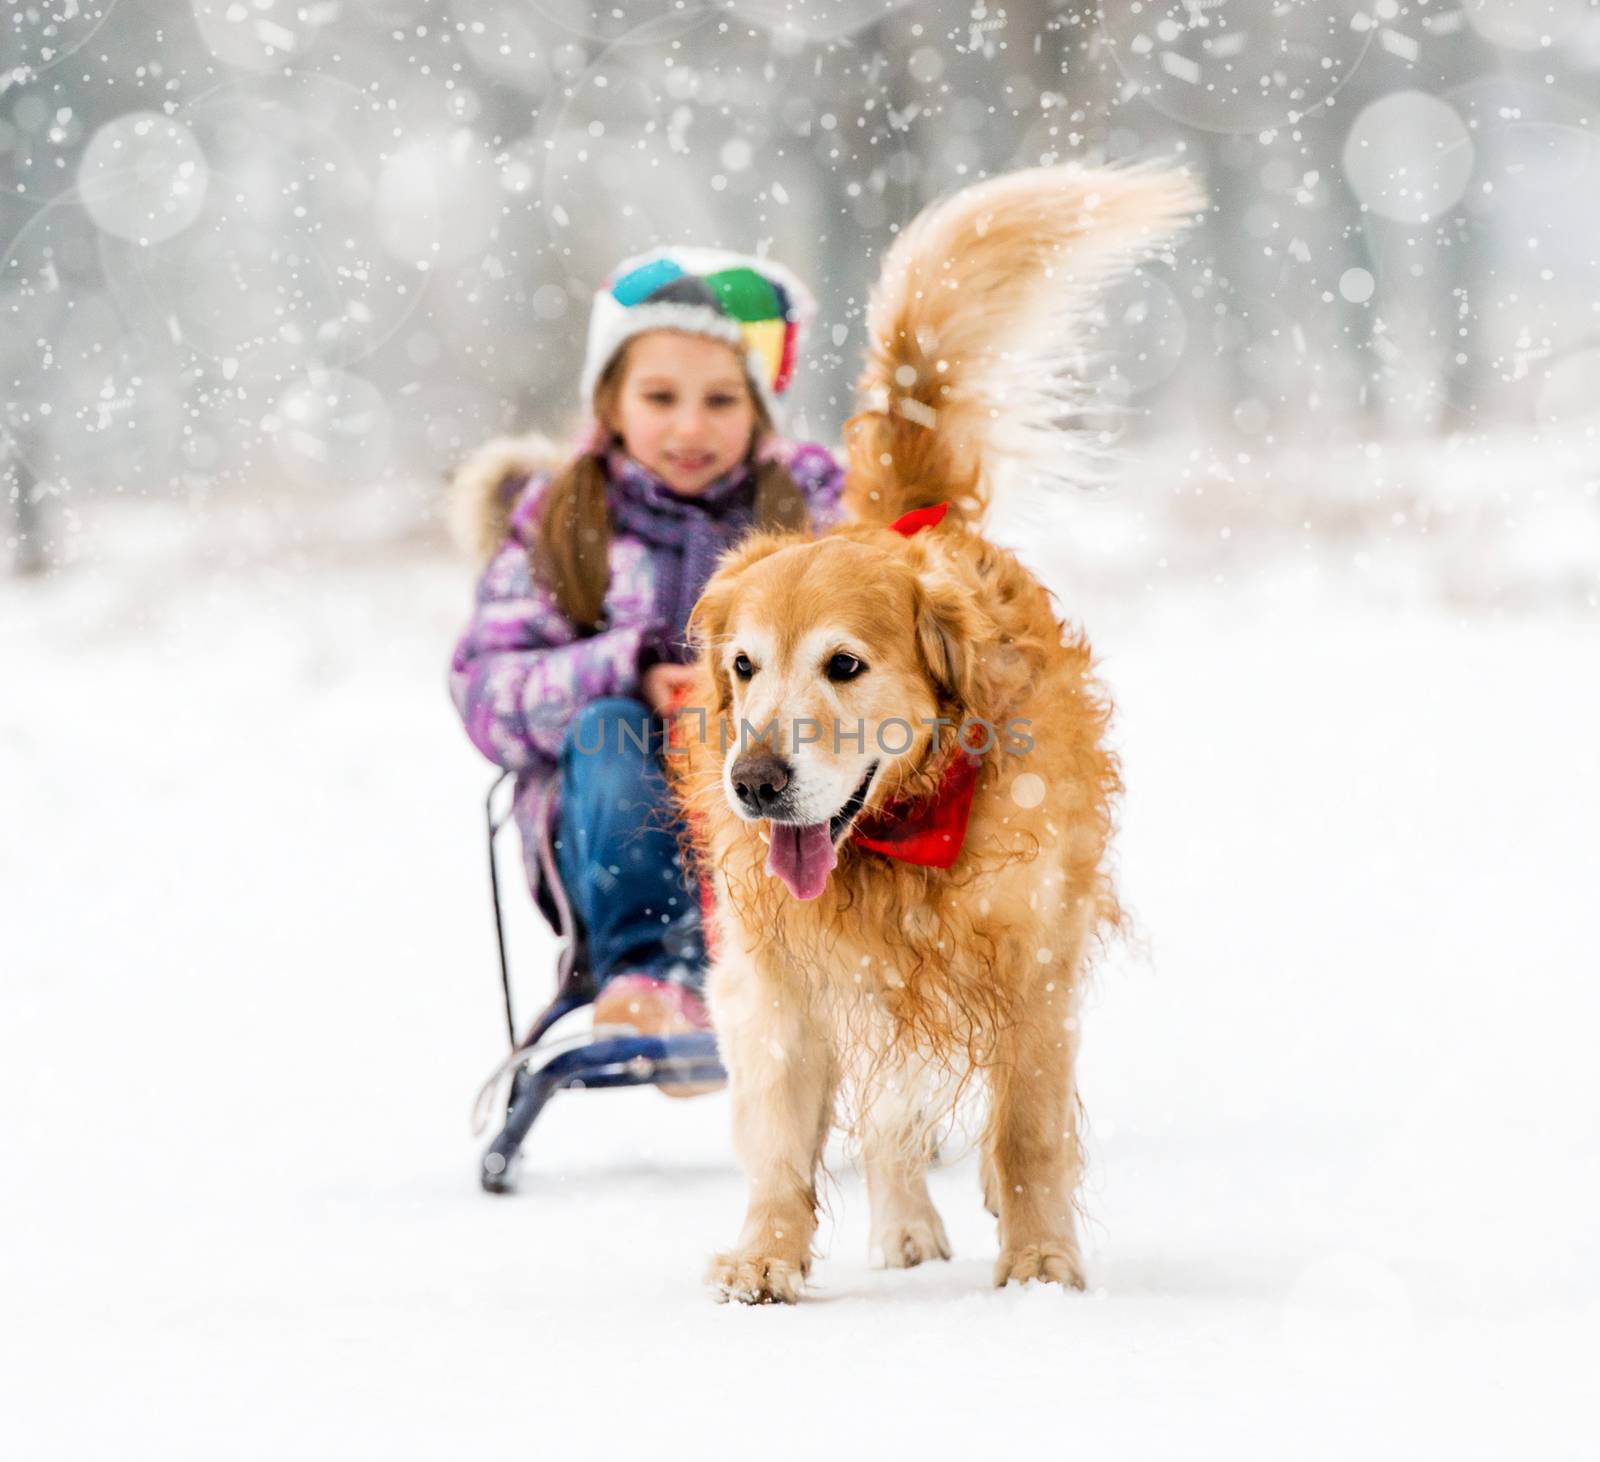 little girl with sledge and dog by GekaSkr